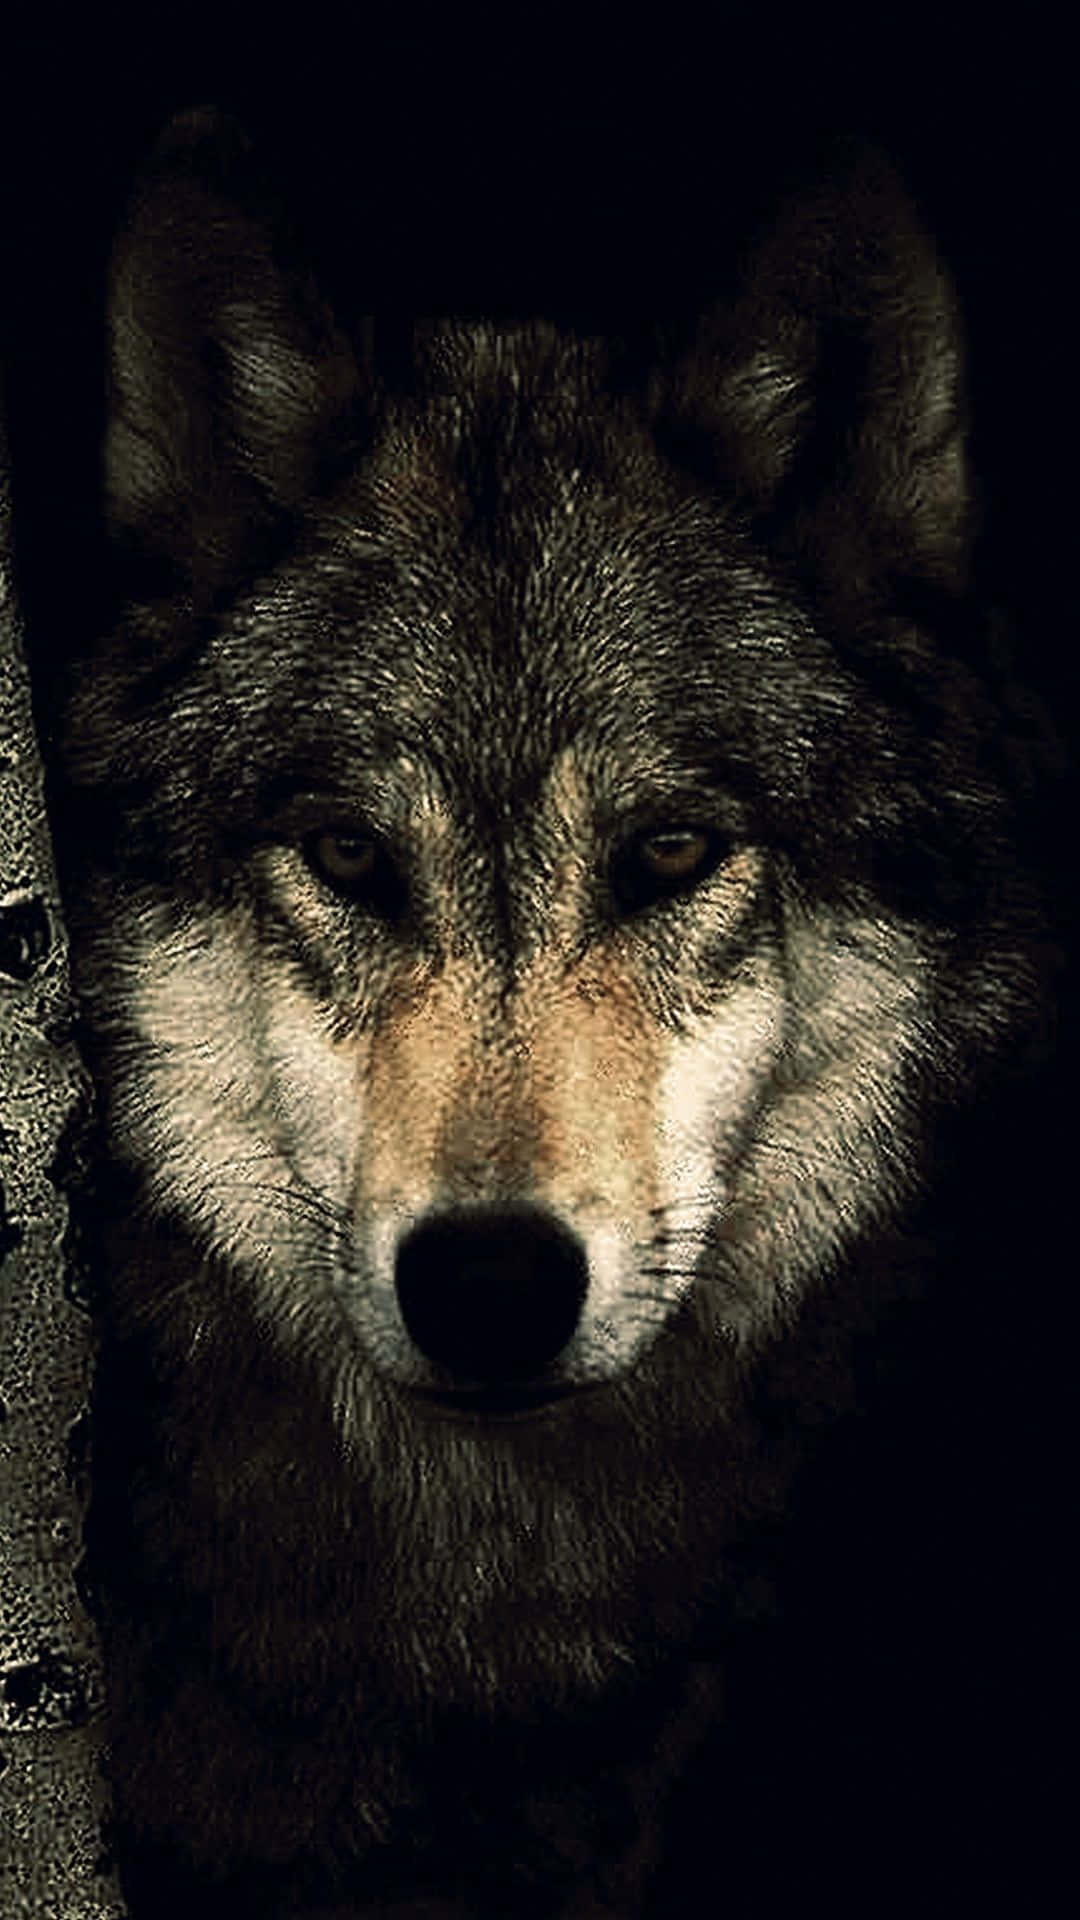 A Wolf Is Looking At The Camera In The Dark Wallpaper